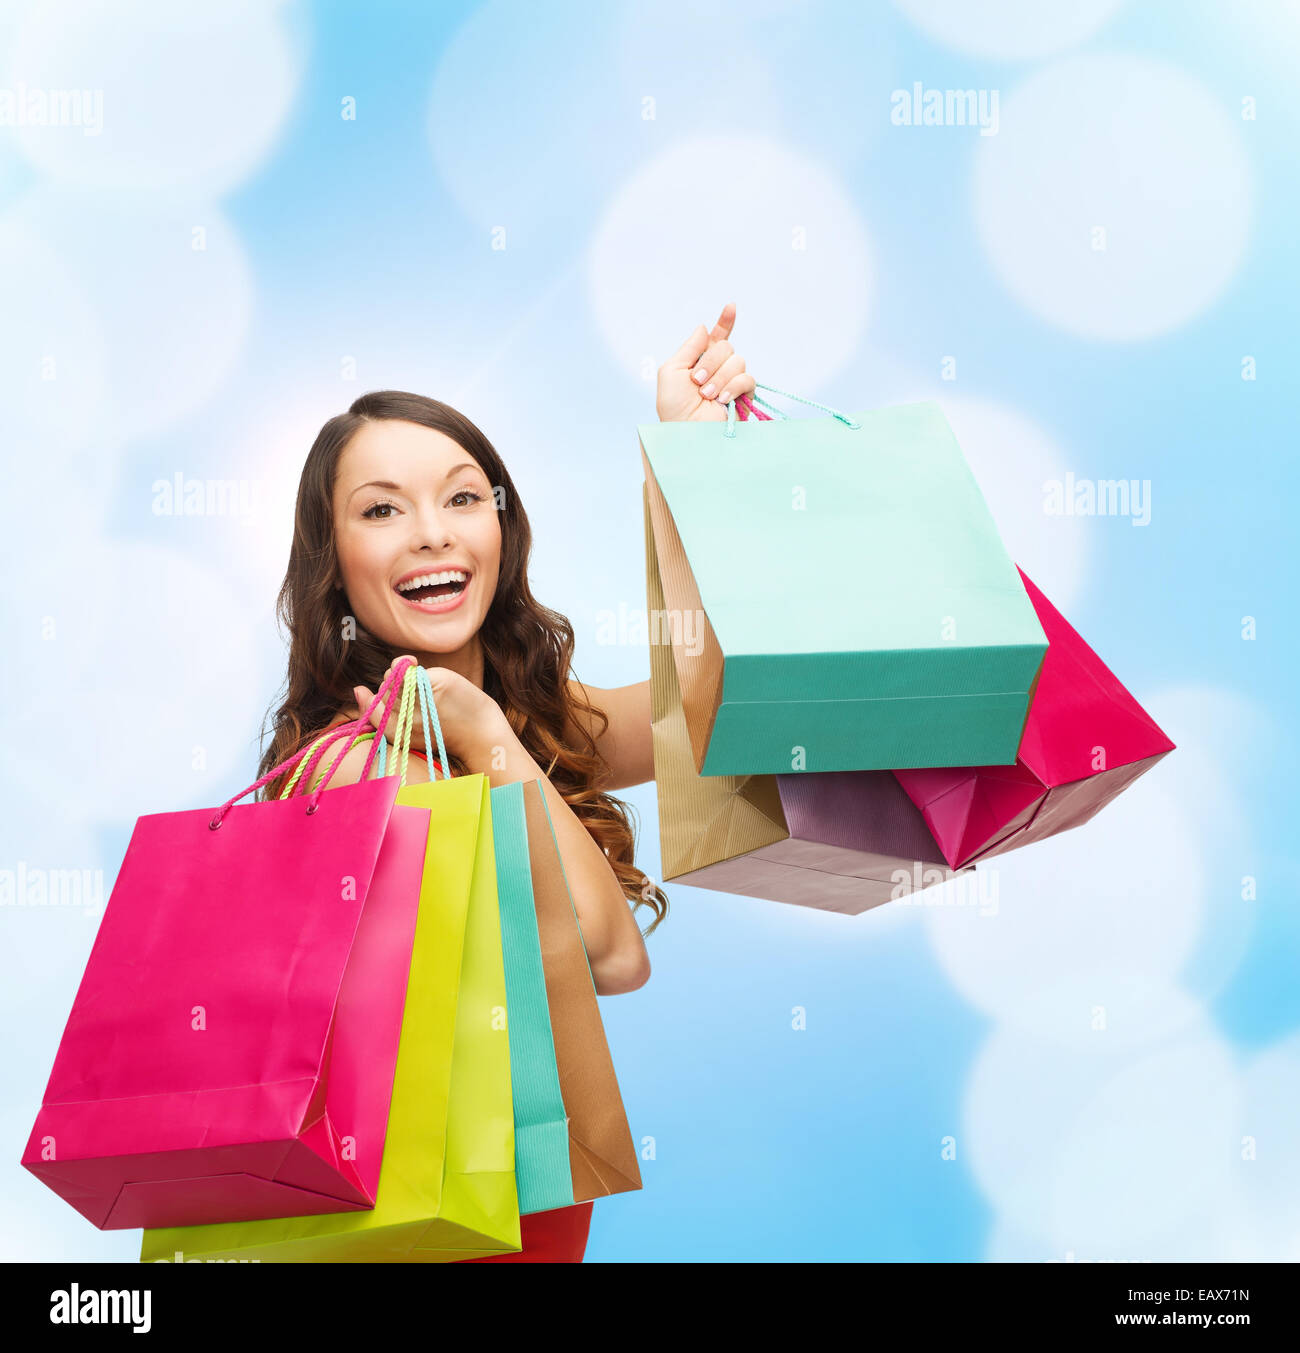 smiling woman with colorful shopping bags Stock Photo